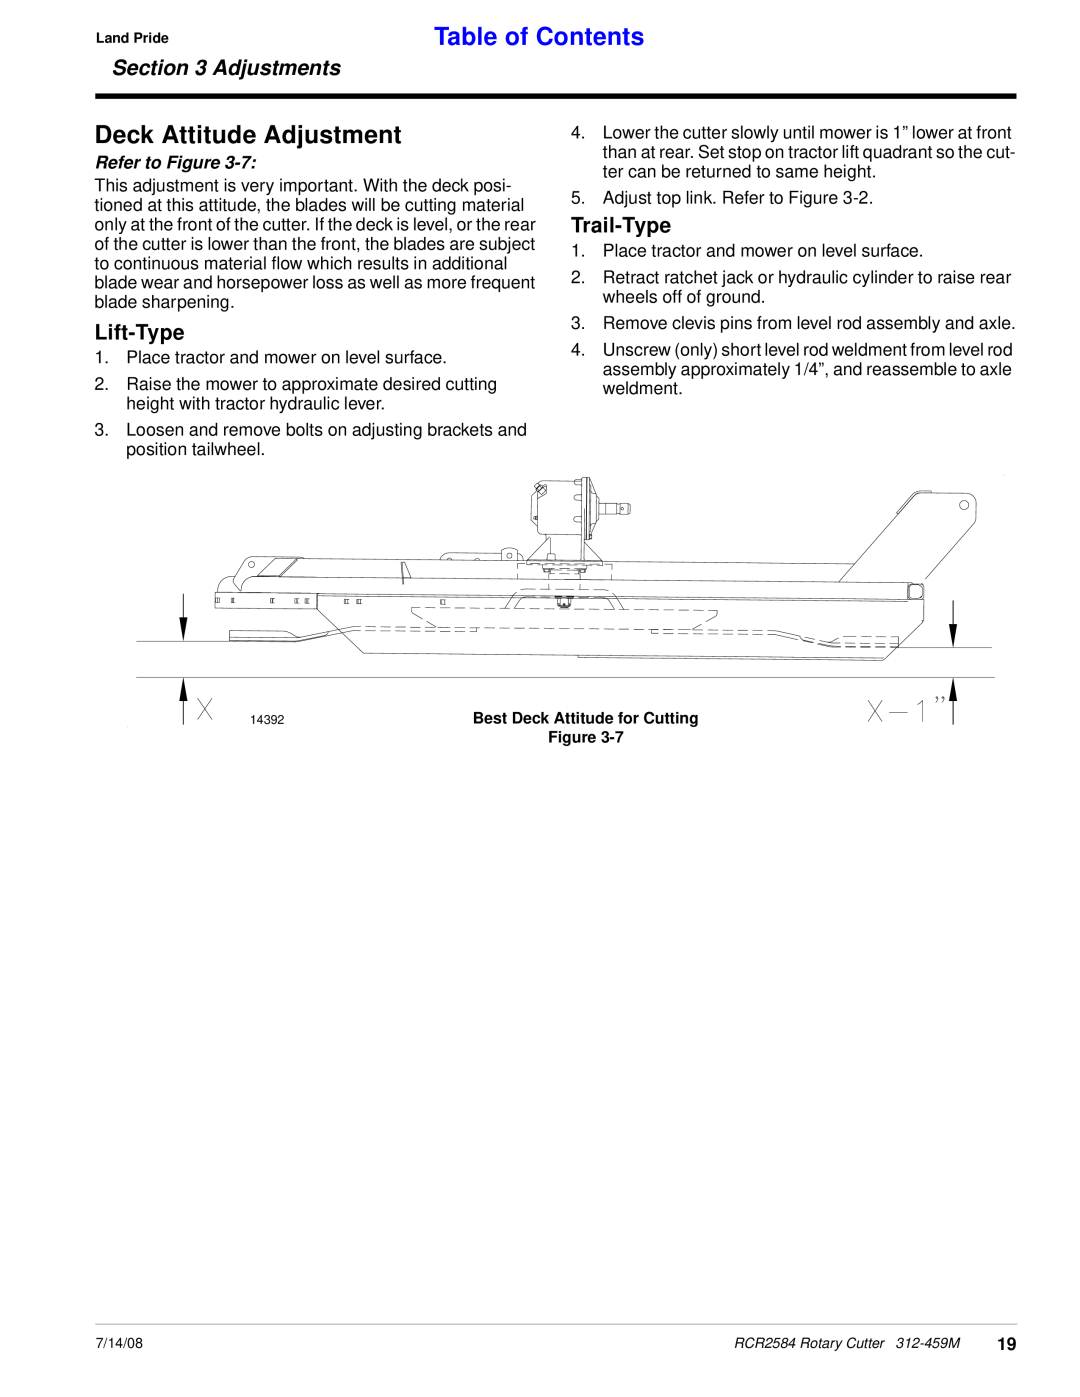 Land Pride RCR2584 manual Deck Attitude Adjustment, Lift-Type, Trail-Type, Table of Contents, Adjustments, Refer to Figure 